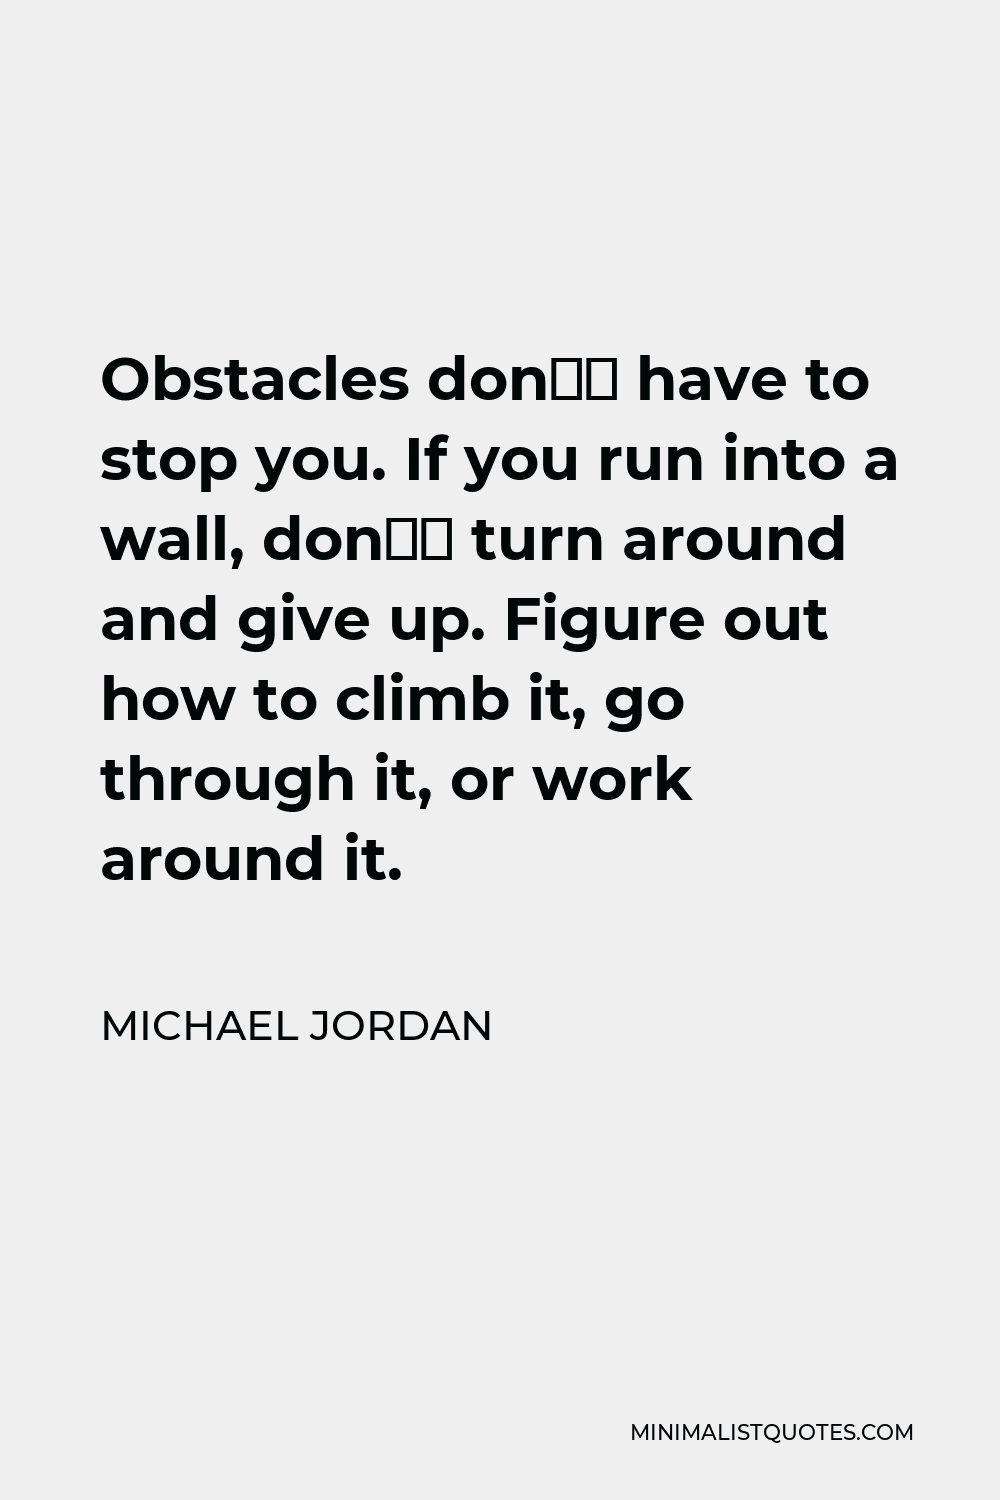 Michael Jordan Quote - Obstacles don’t have to stop you. If you run into a wall, don’t turn around and give up. Figure out how to climb it, go through it, or work around it.